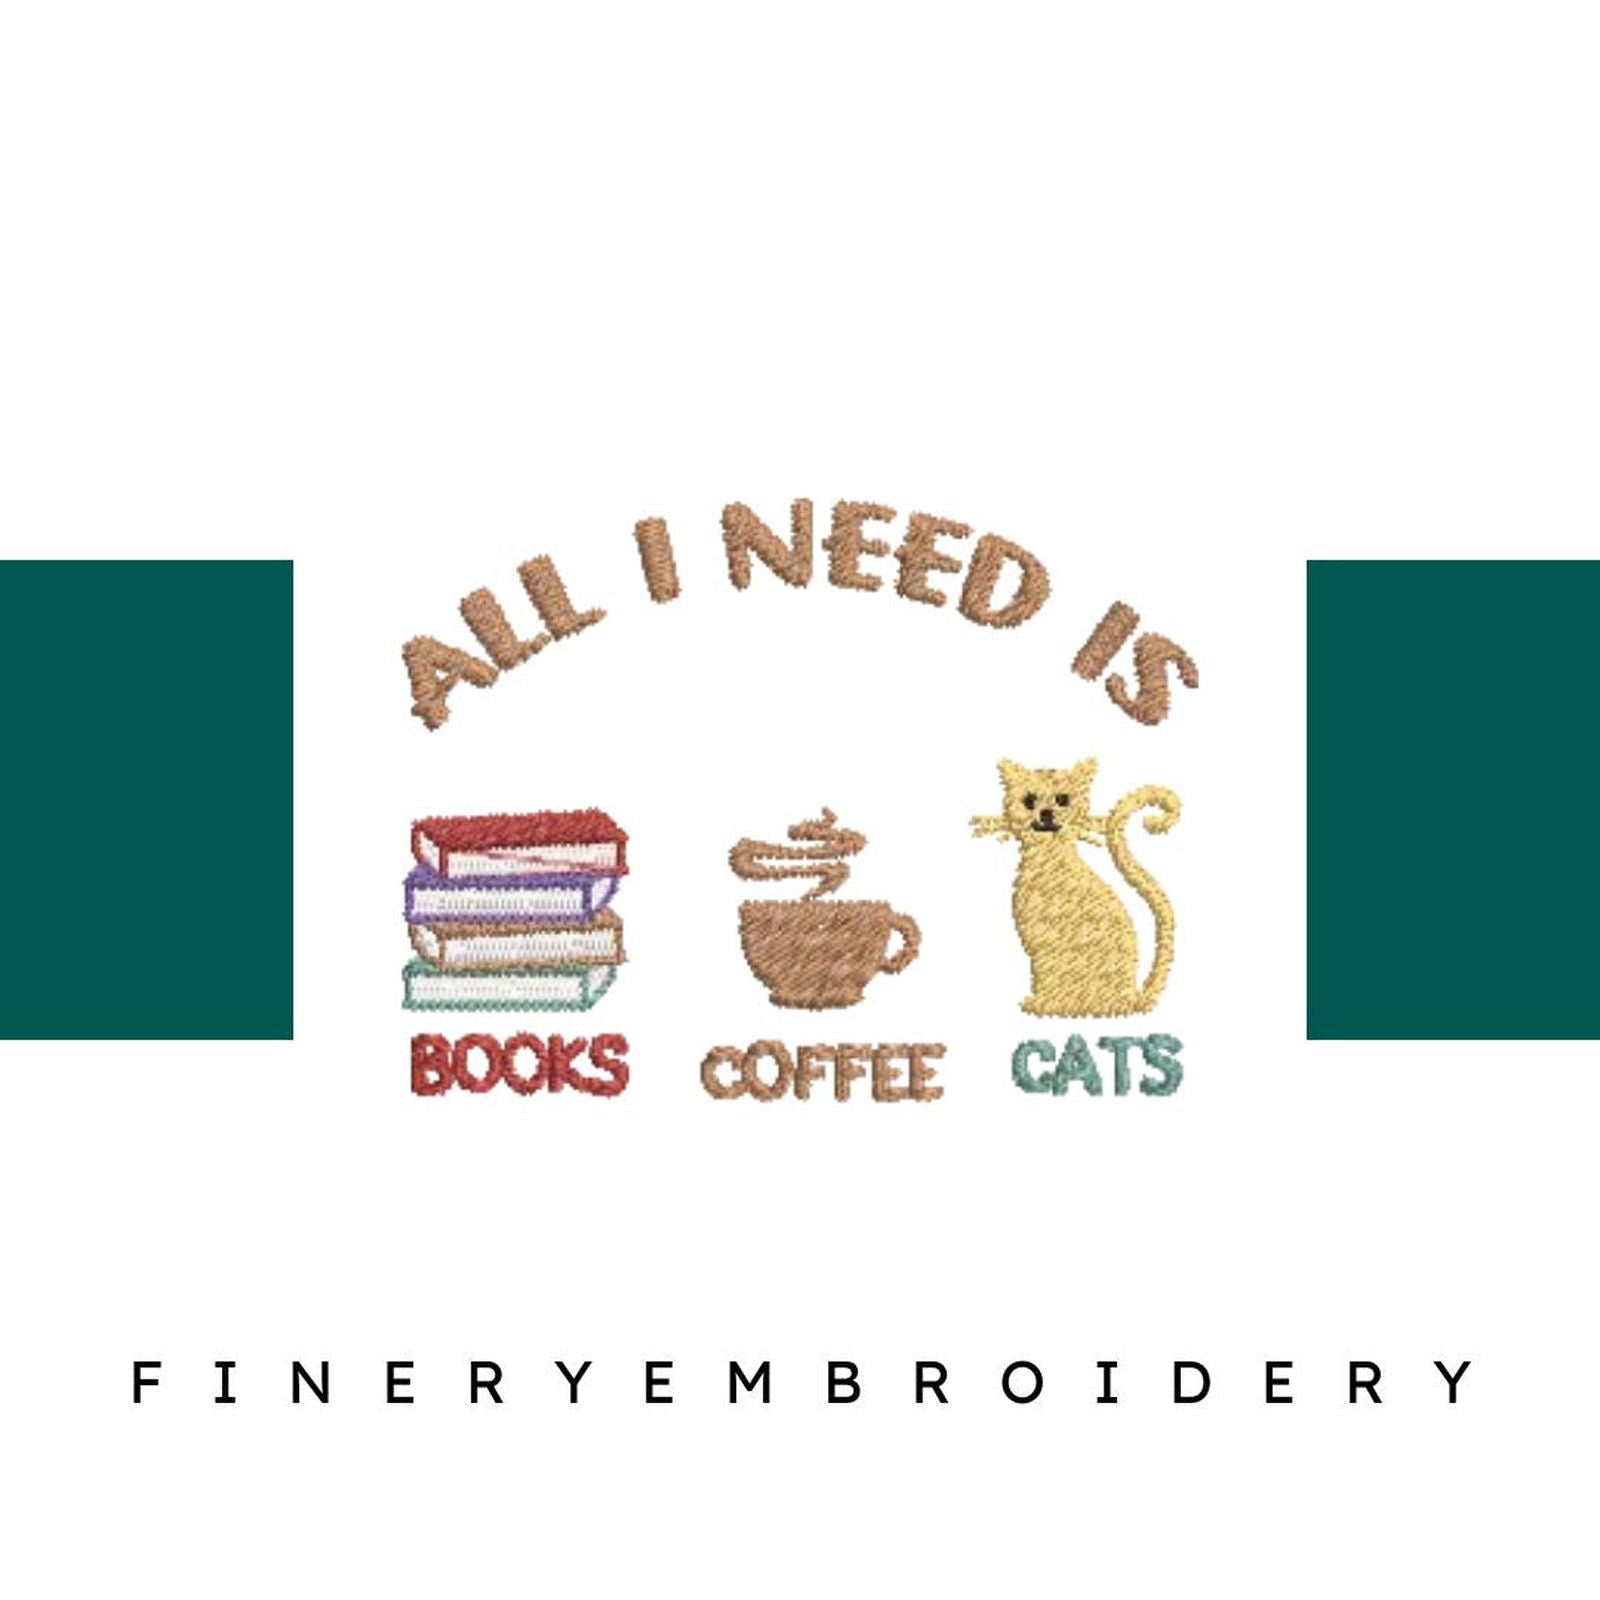 All-I-Need-is-Book - Embroidery Design - FineryEmbroidery